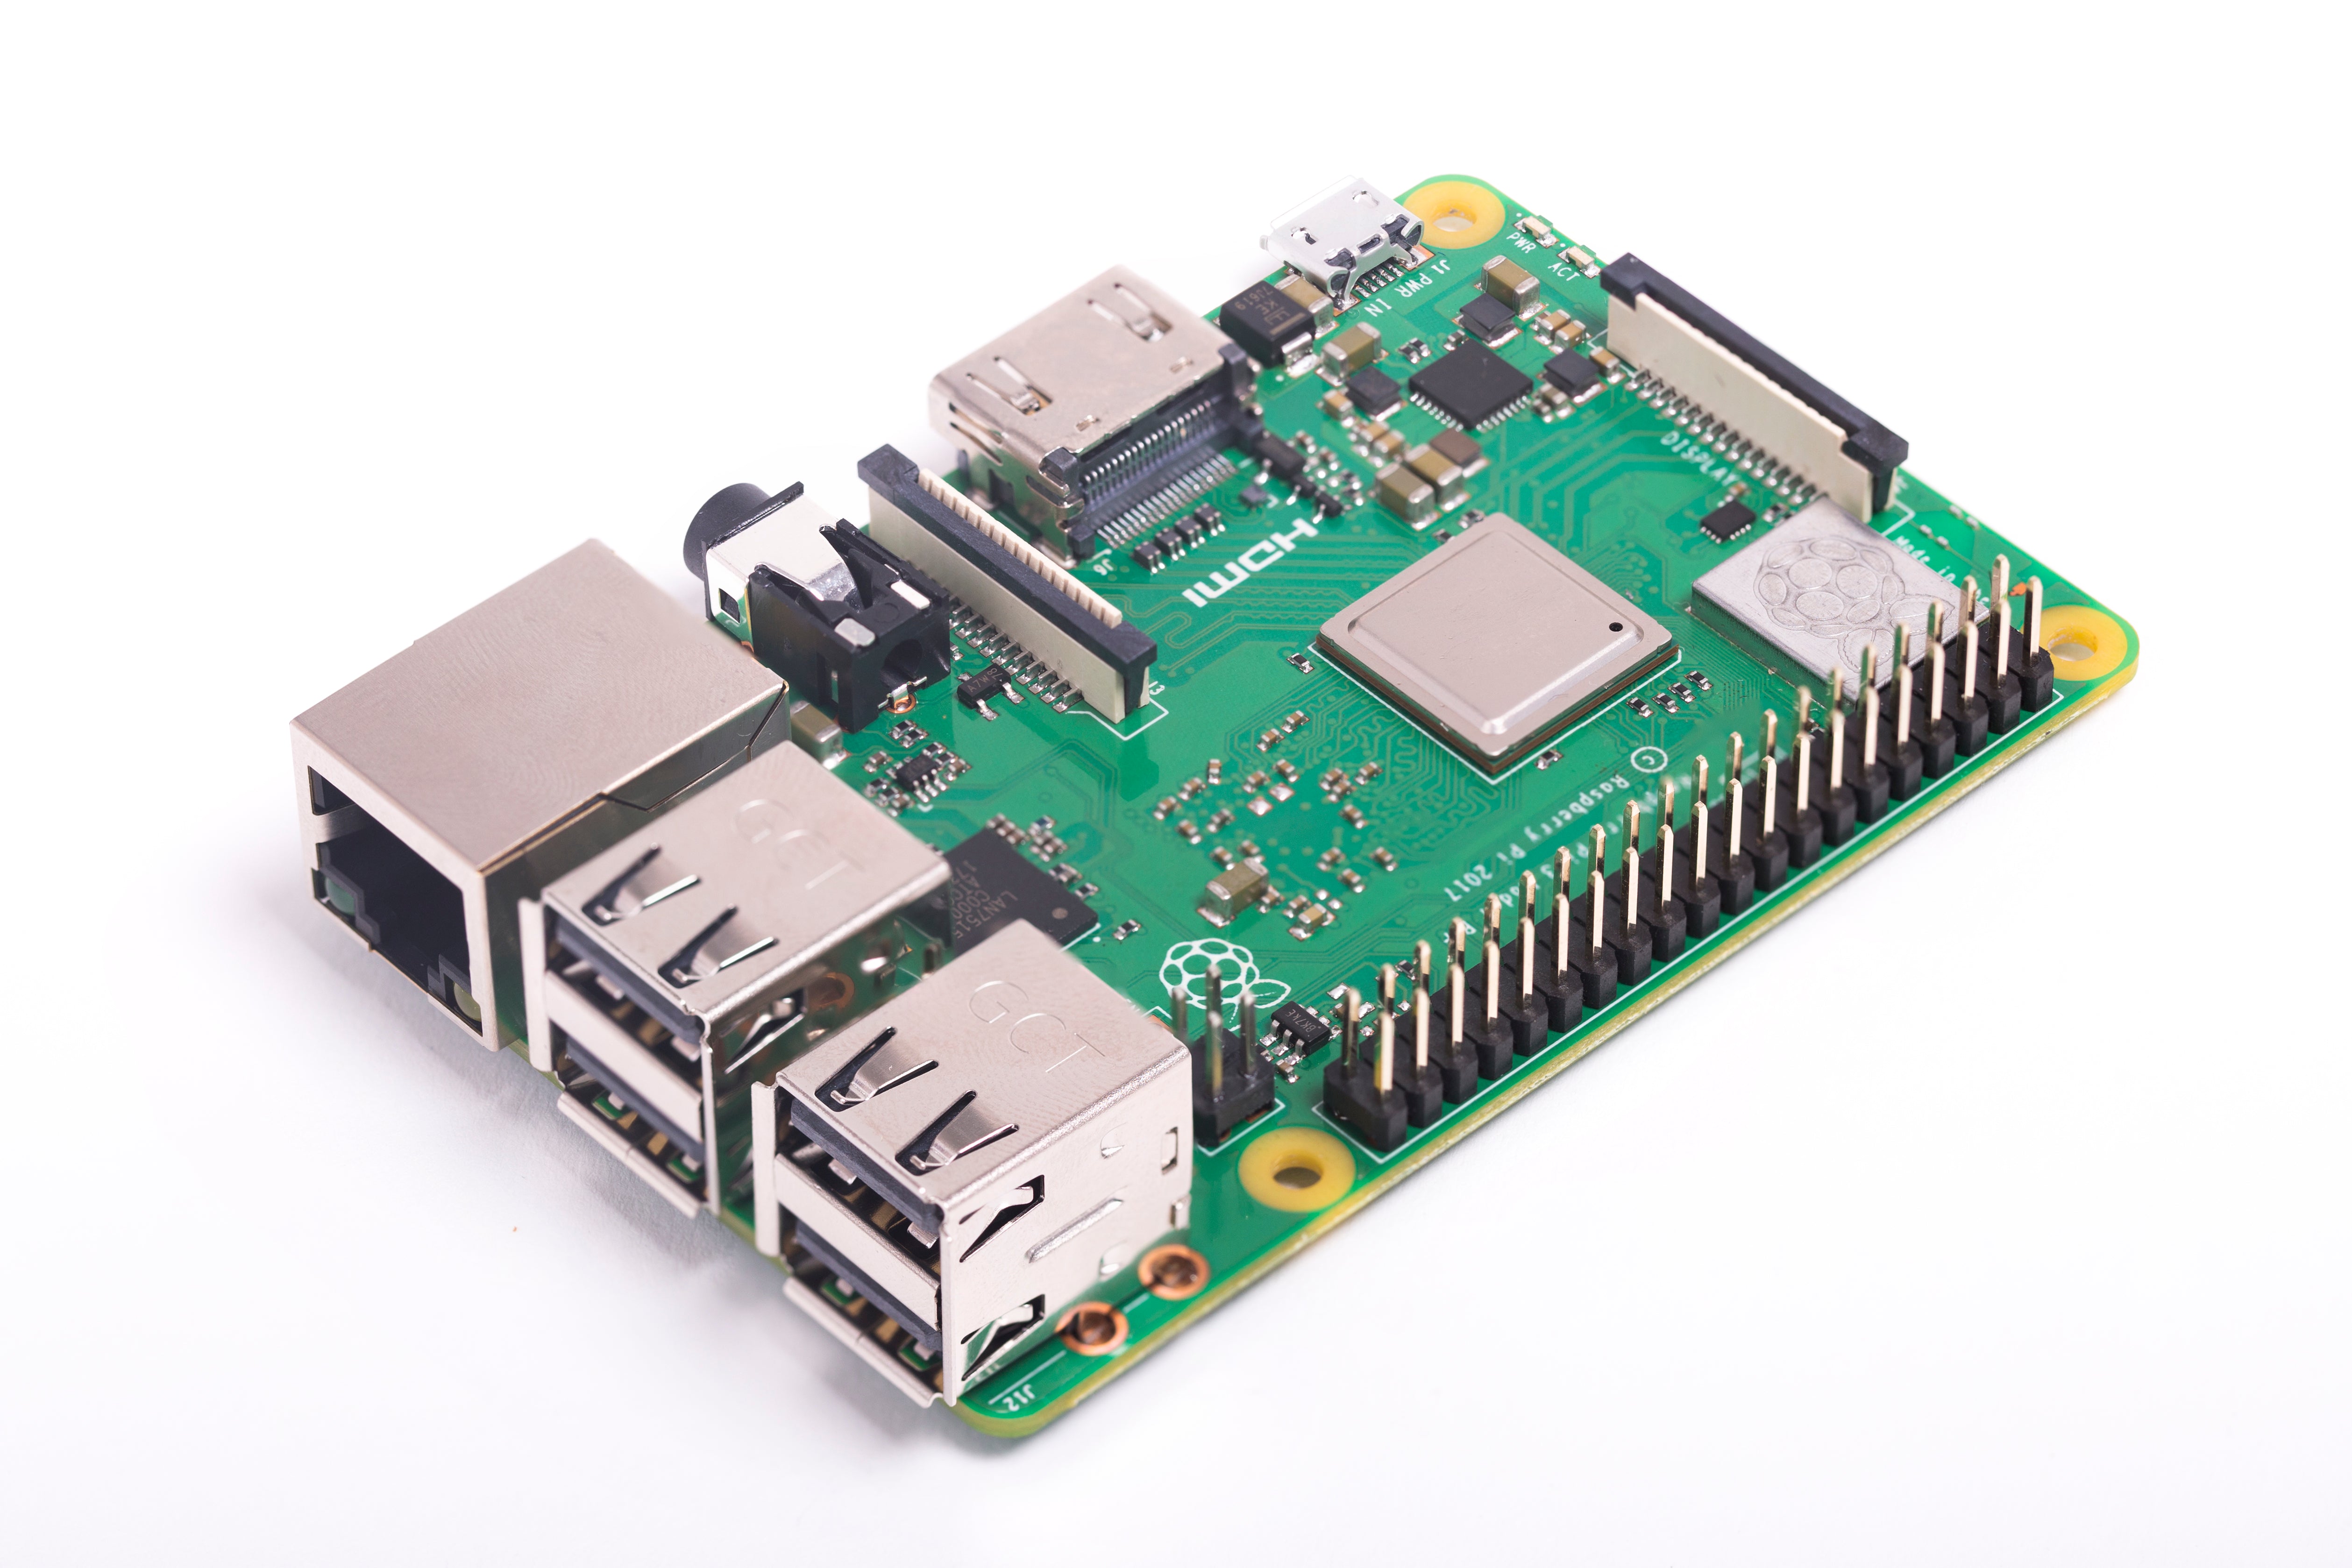 Raspberry Pi 3 Model B+ (One Per Customer, Per Month) (Delivery By 25th MAY 2022)